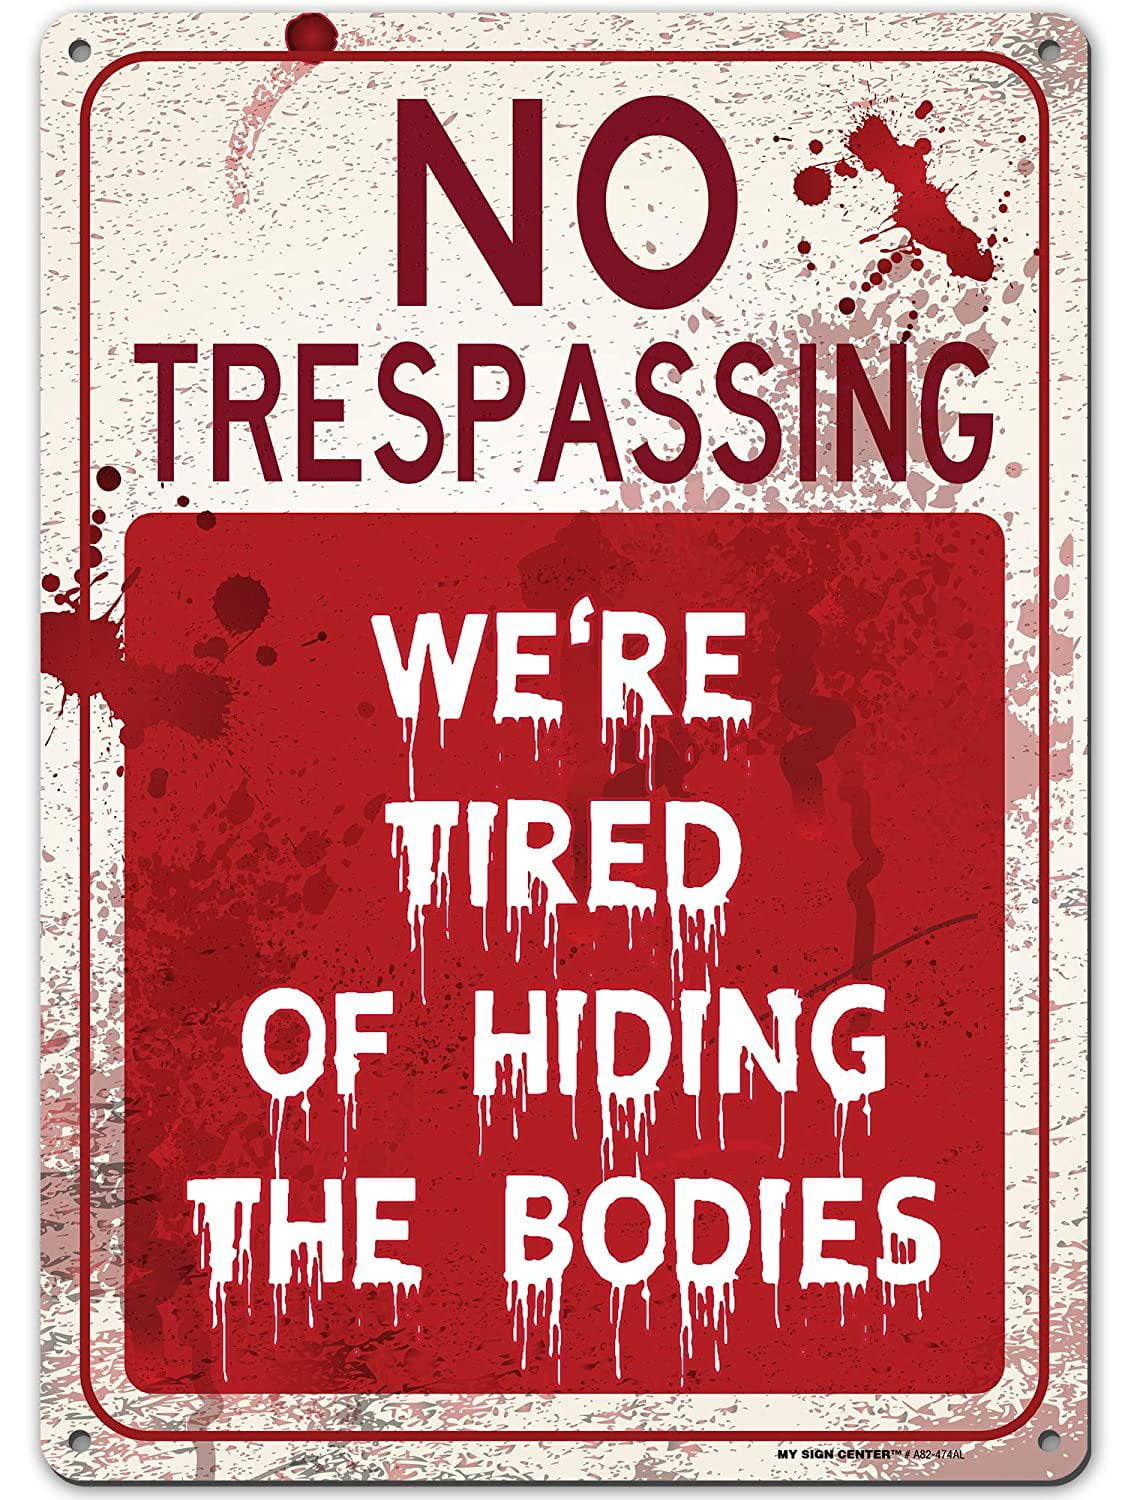 no trespassing Metal Tin Sign Humor Funny Tried Of Hiding Bodies Garage Bar New 